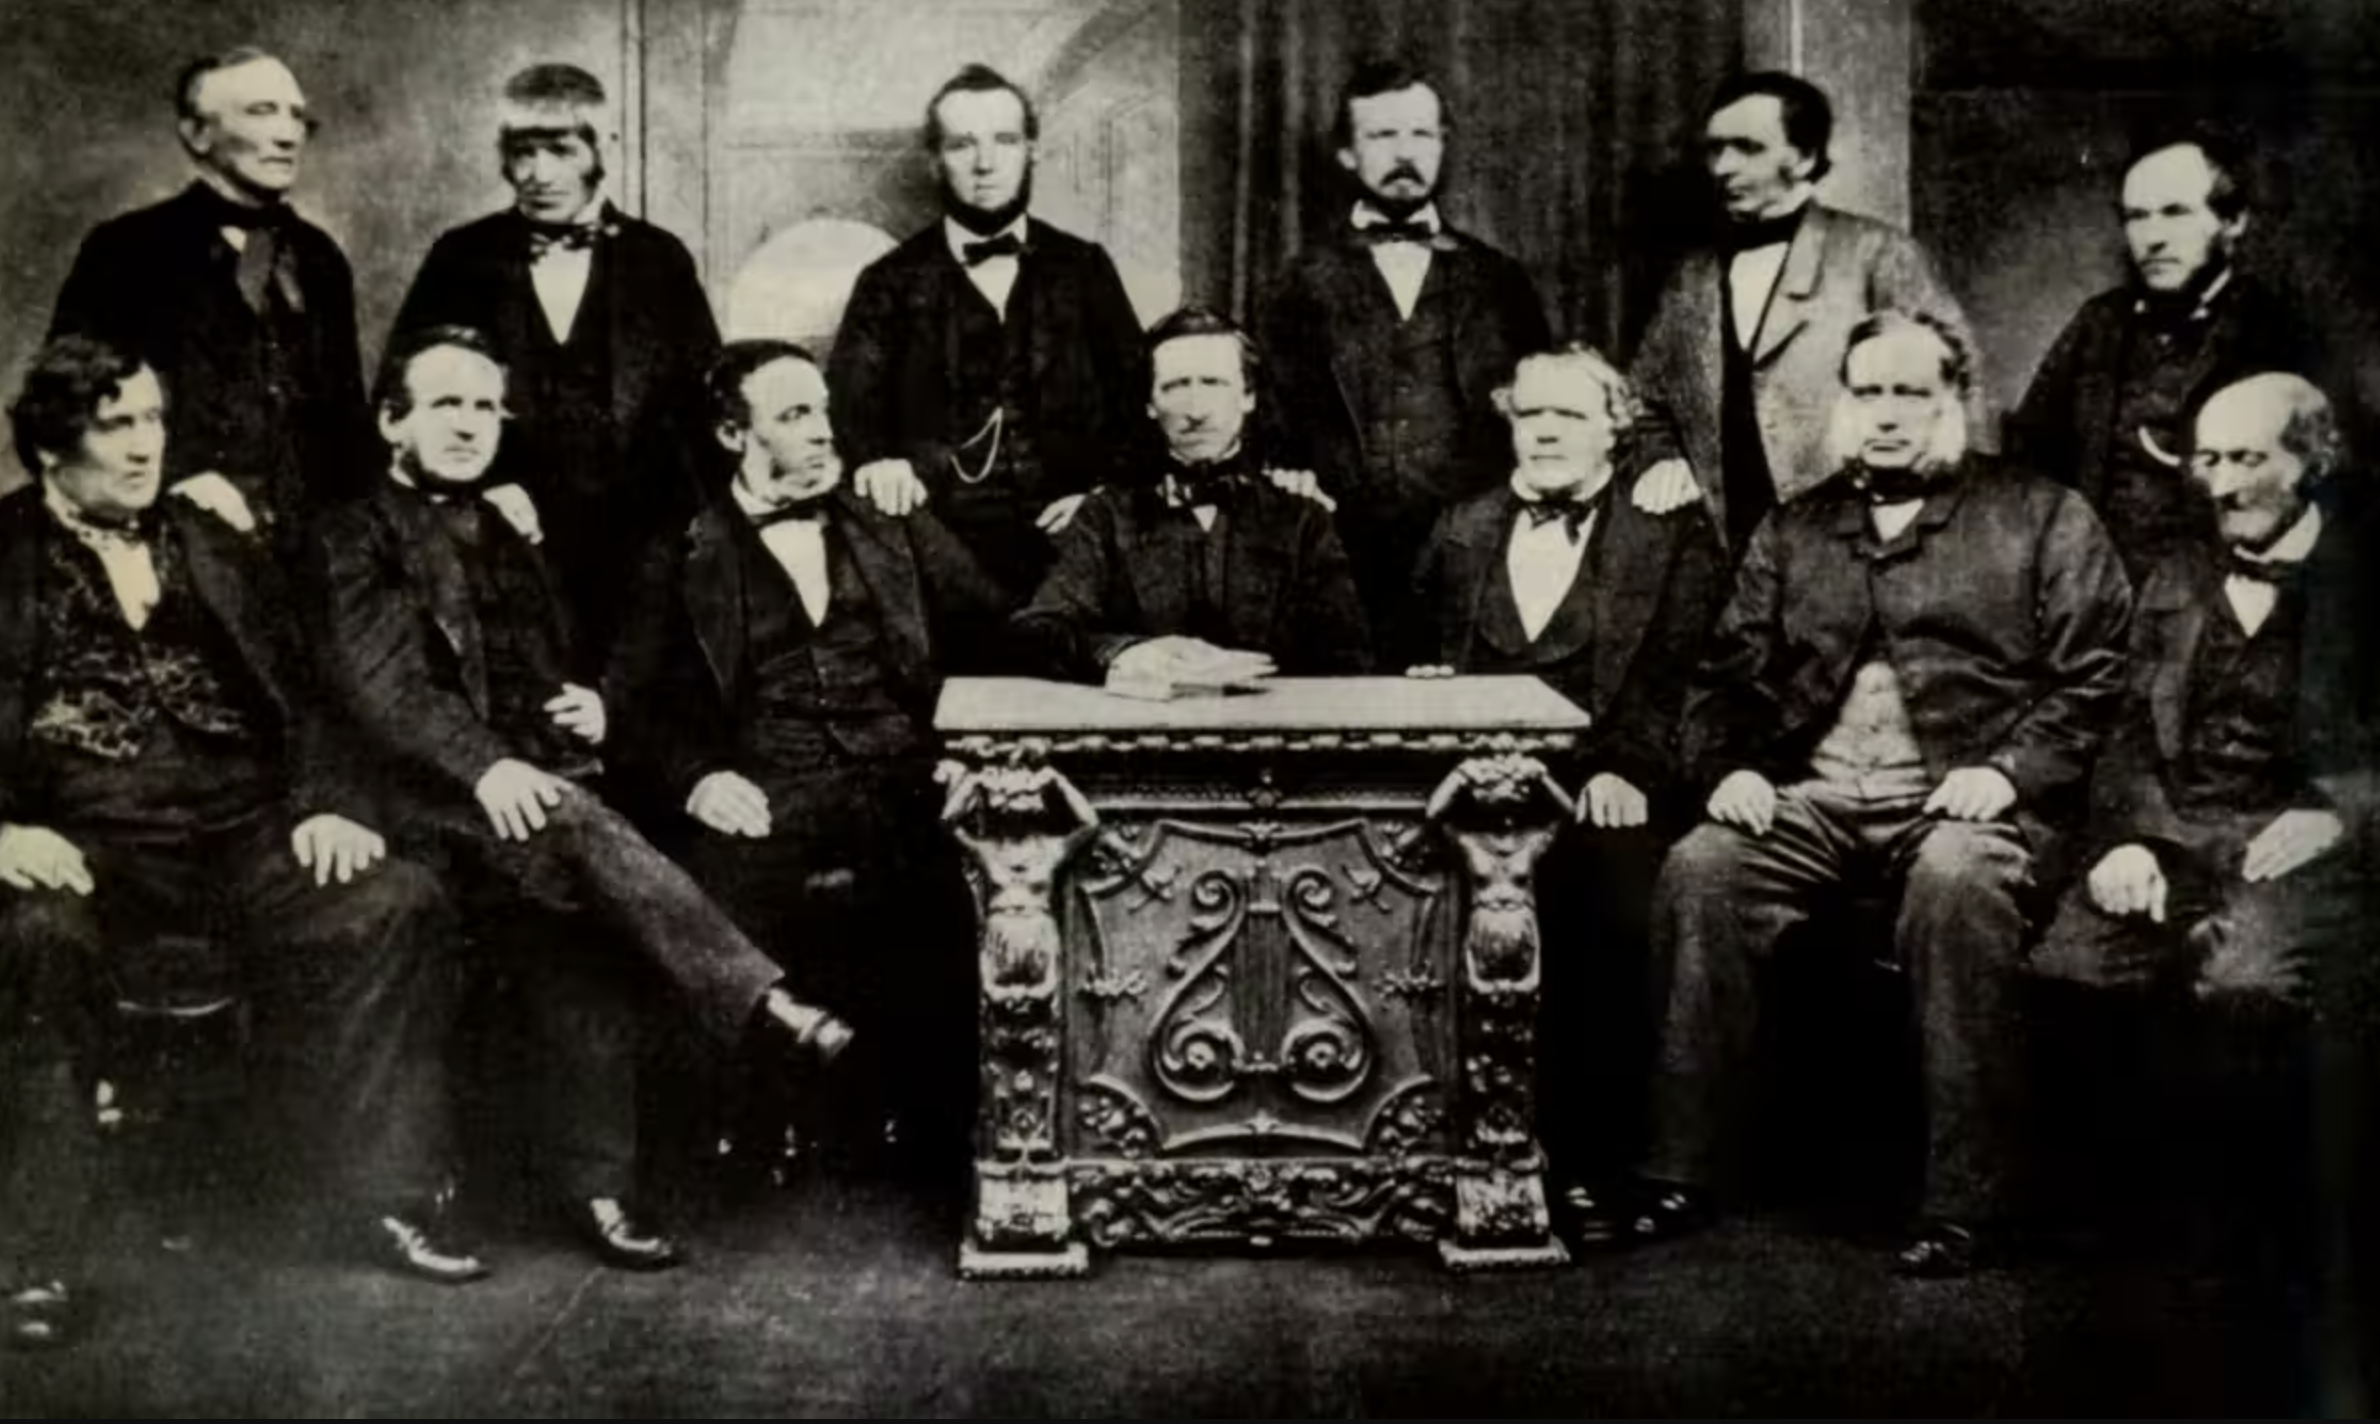 The founding members of the Rochdale Equitable Pioneer Society, circa 1870. Hamburg Co-operative Museum